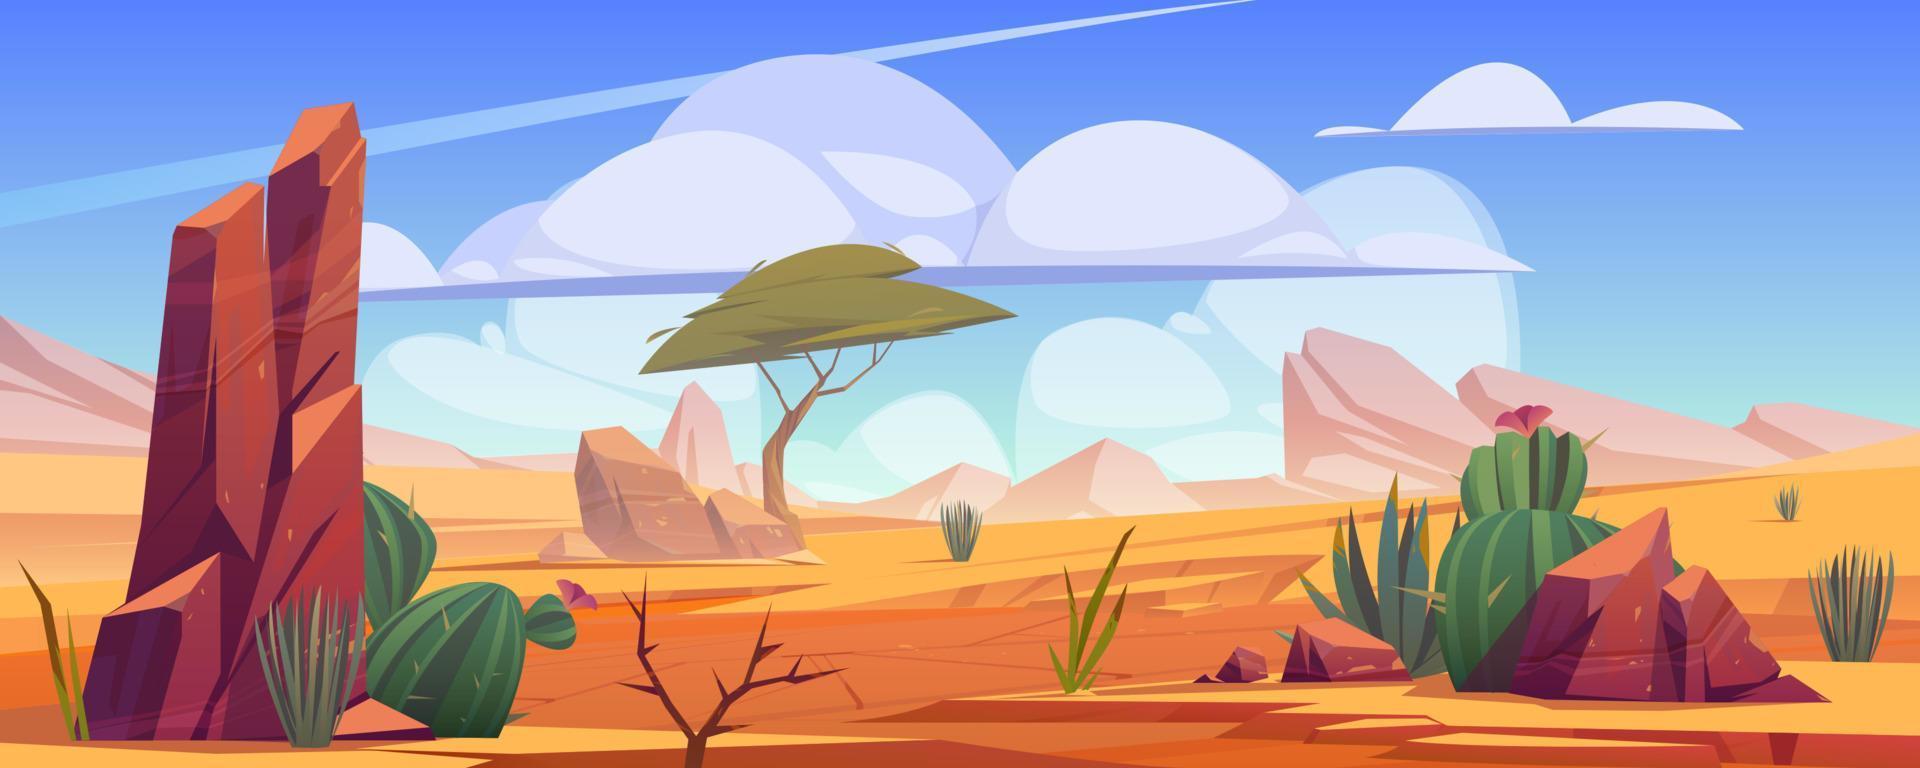 Desert landscape with rocks, tree and cactuses vector